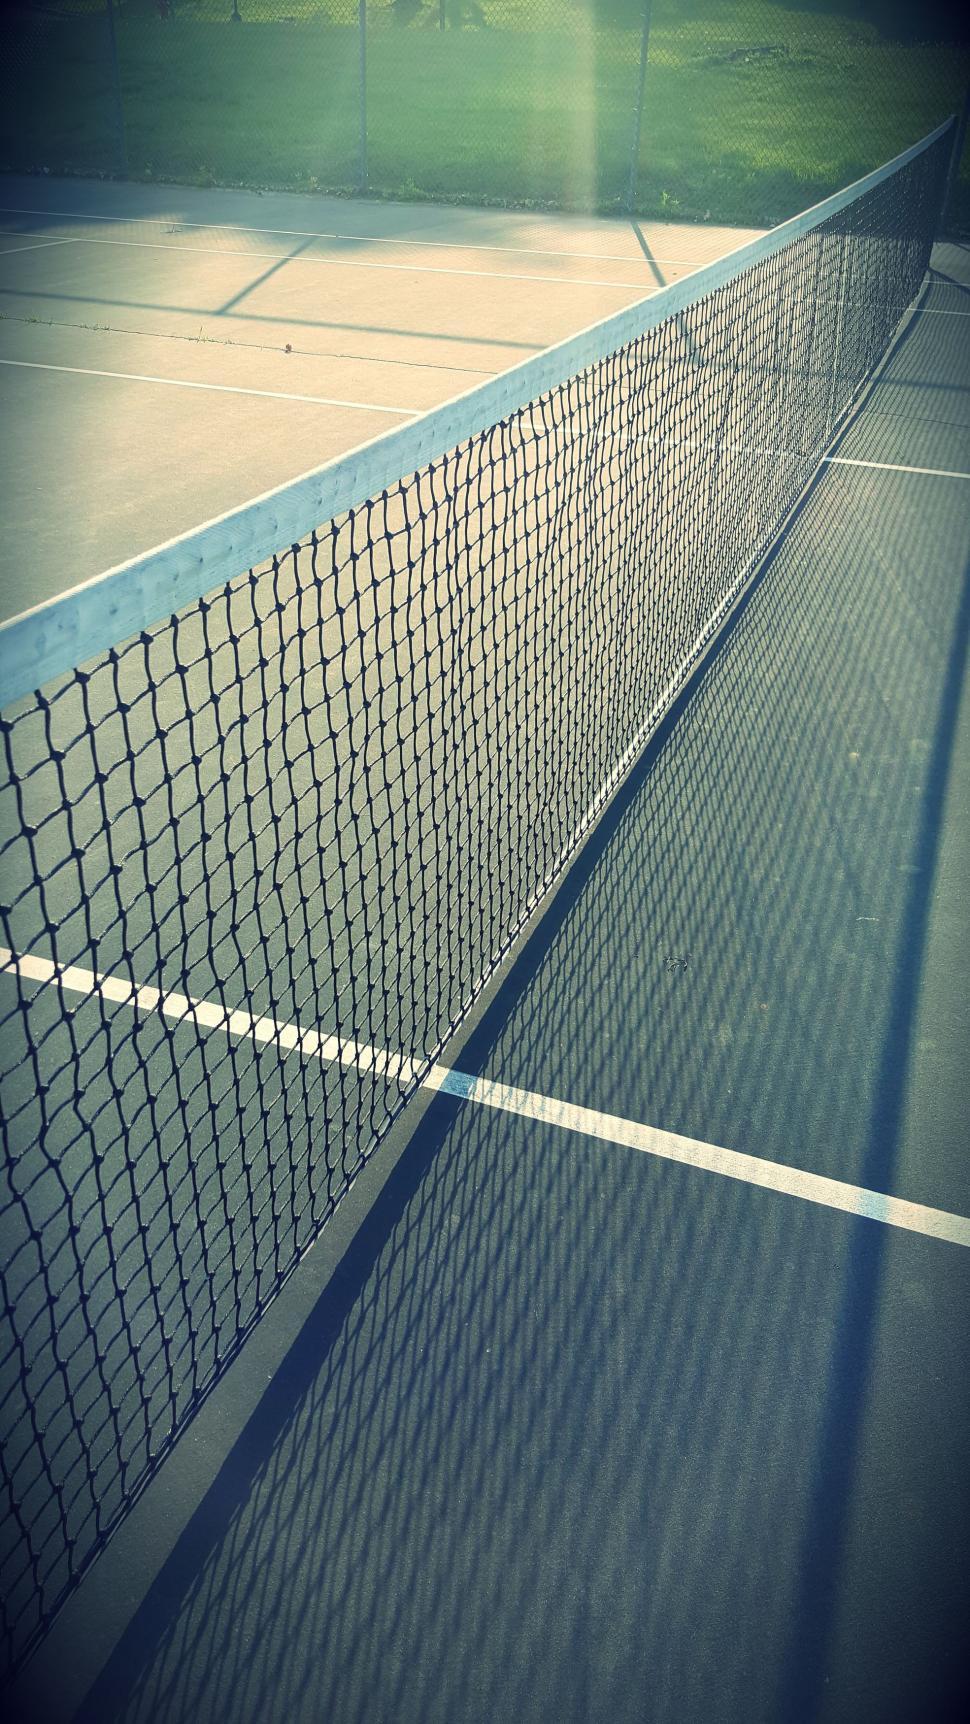 Free Image of Tennis Court with Net  